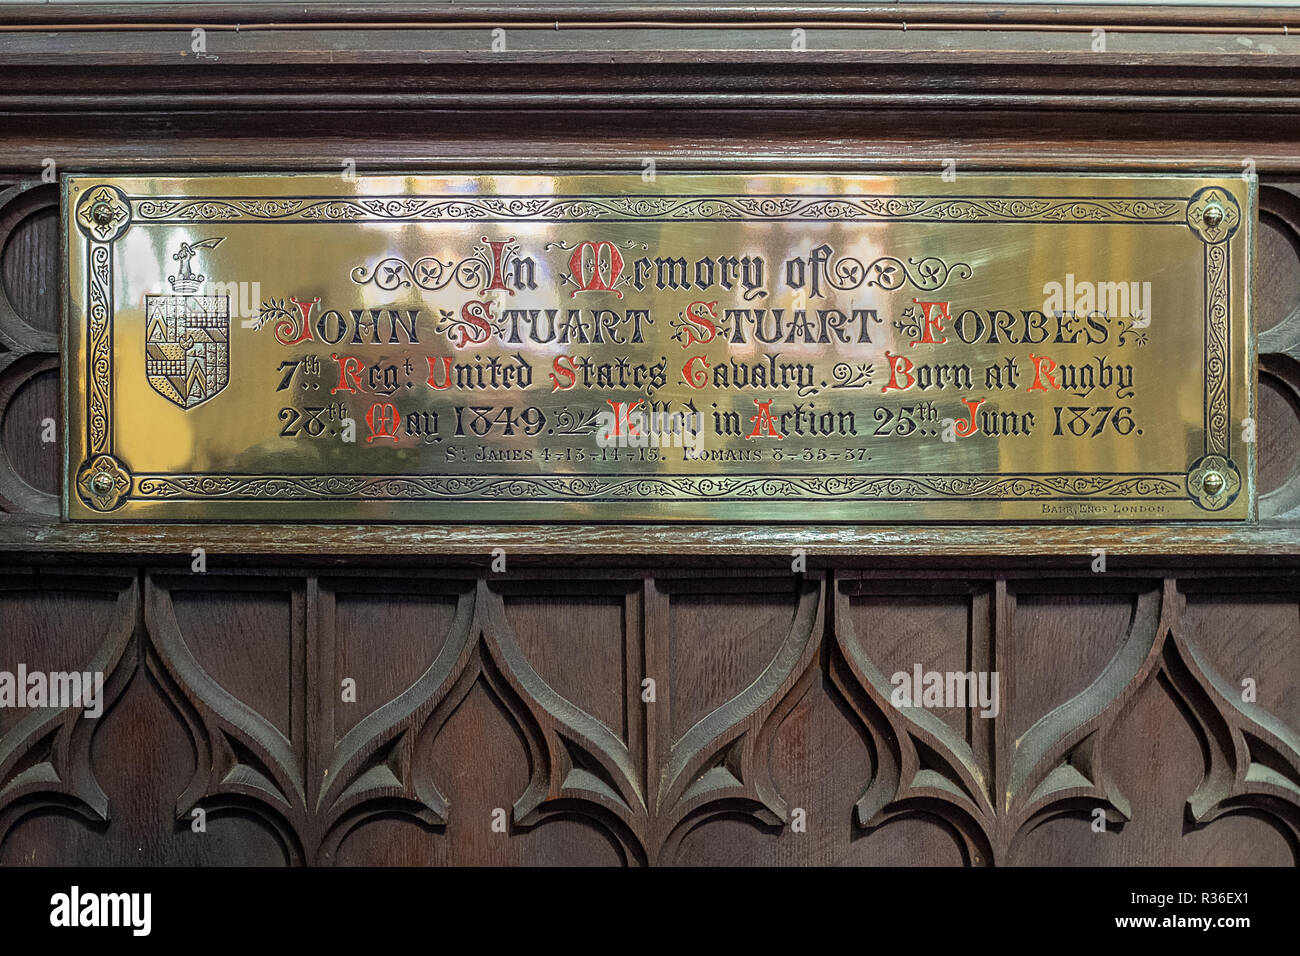 Plaque to Scot John Stuart Stuart Forbes who fought & died as Trooper Hiley with Custer at the Little Big Horn Stock Photo